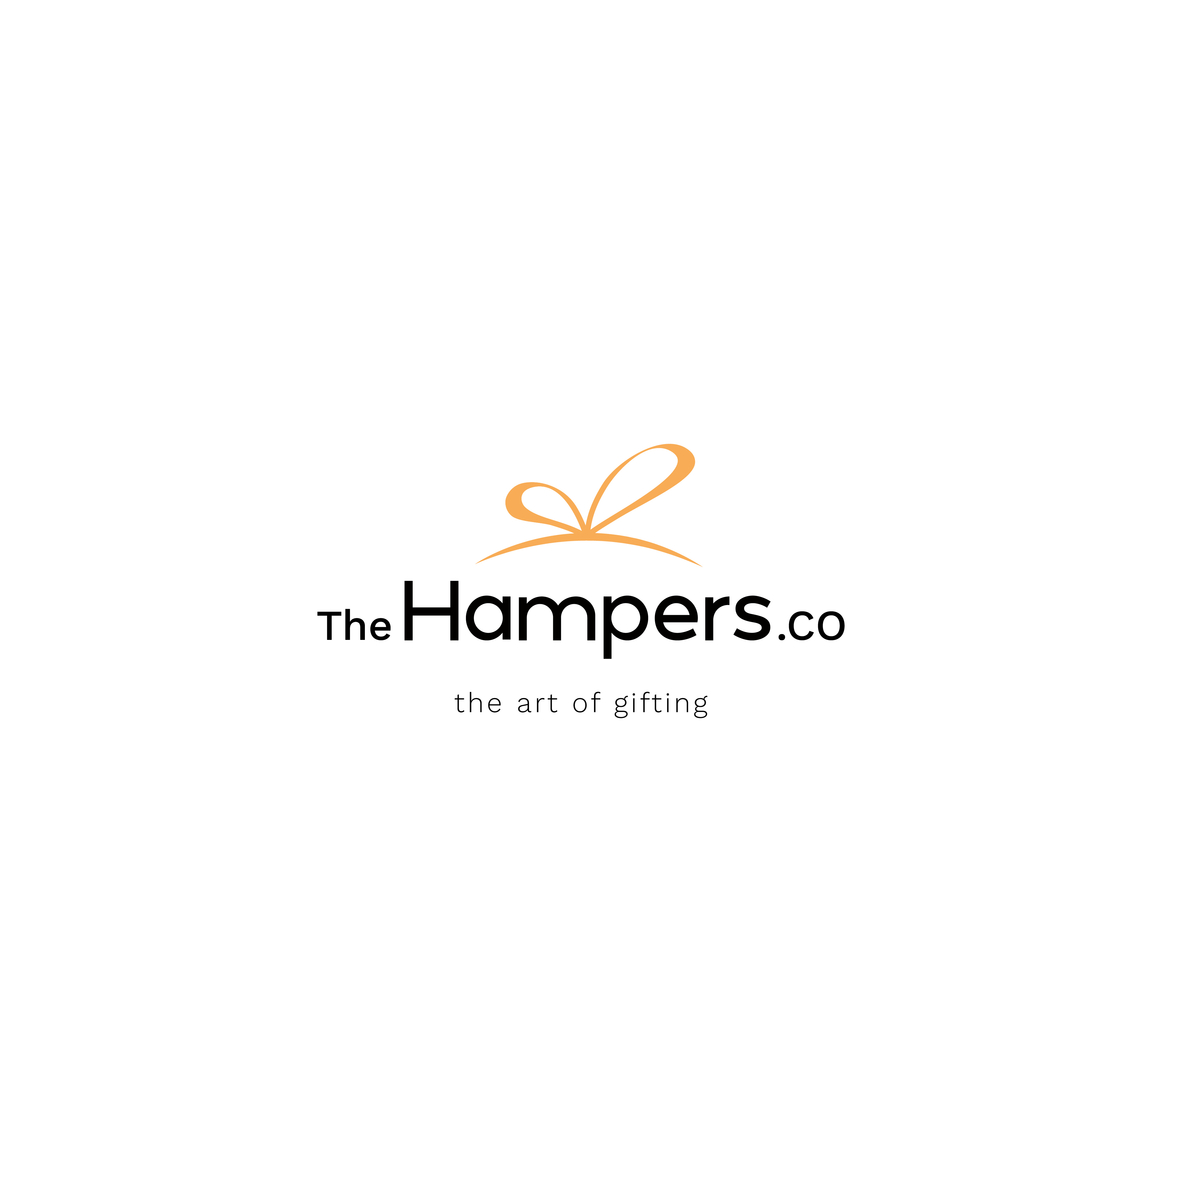 The Hampers co by Nsikanwilliams on Dribbble